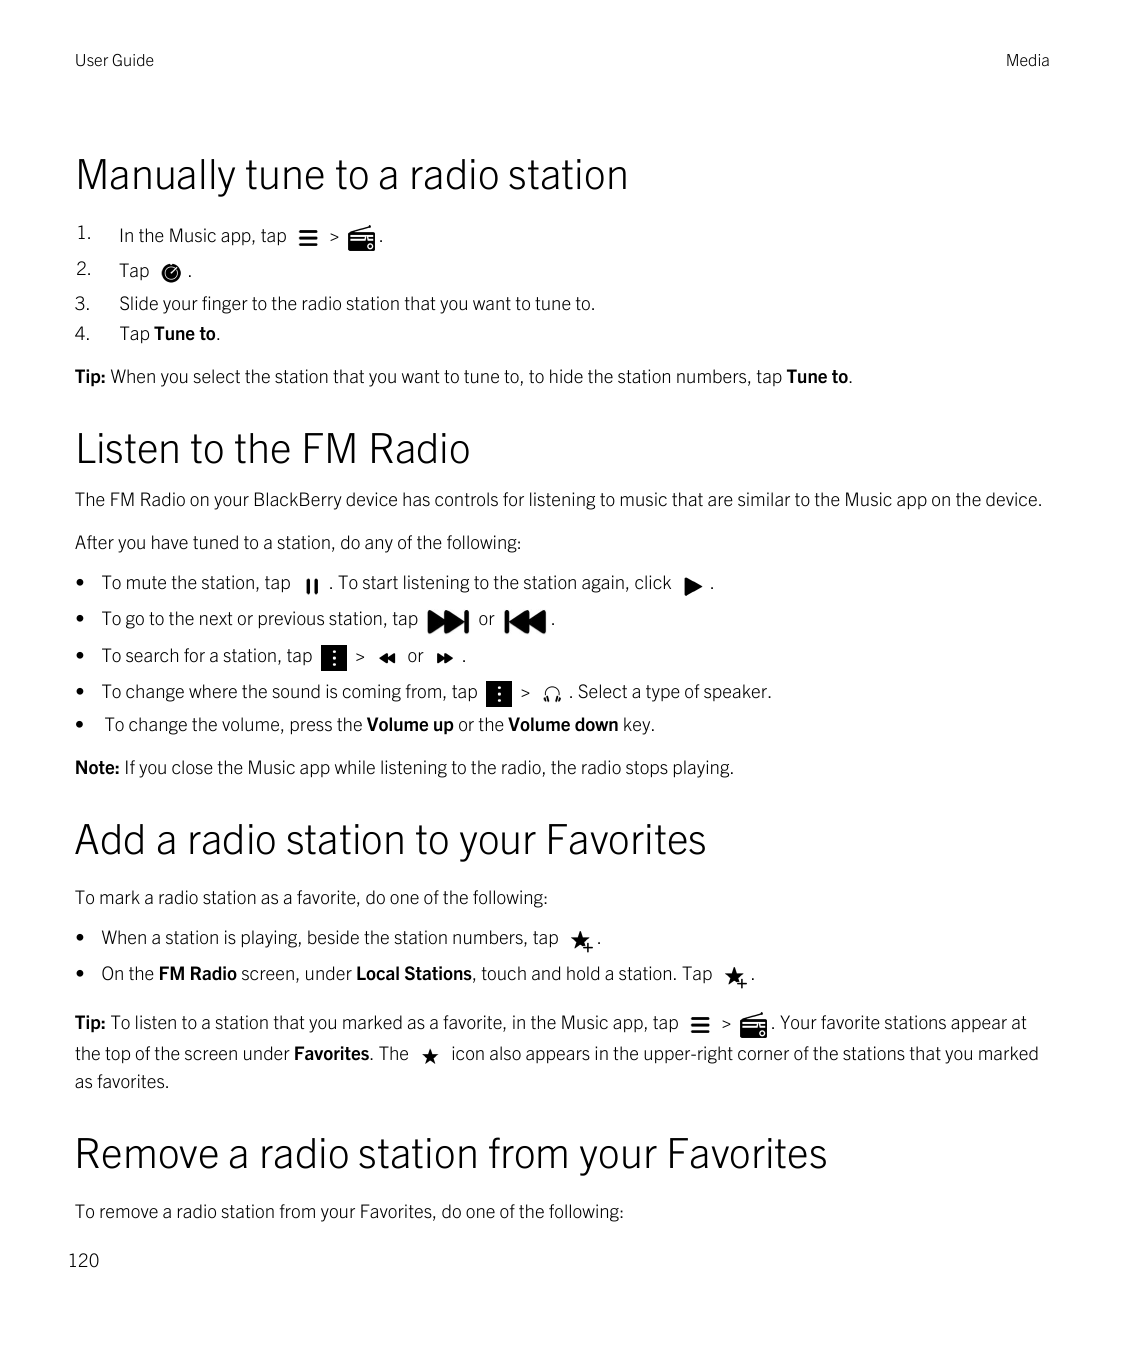 User GuideMediaManually tune to a radio station1.In the Music app, tap2.Tap3.Slide your finger to the radio station that you wan